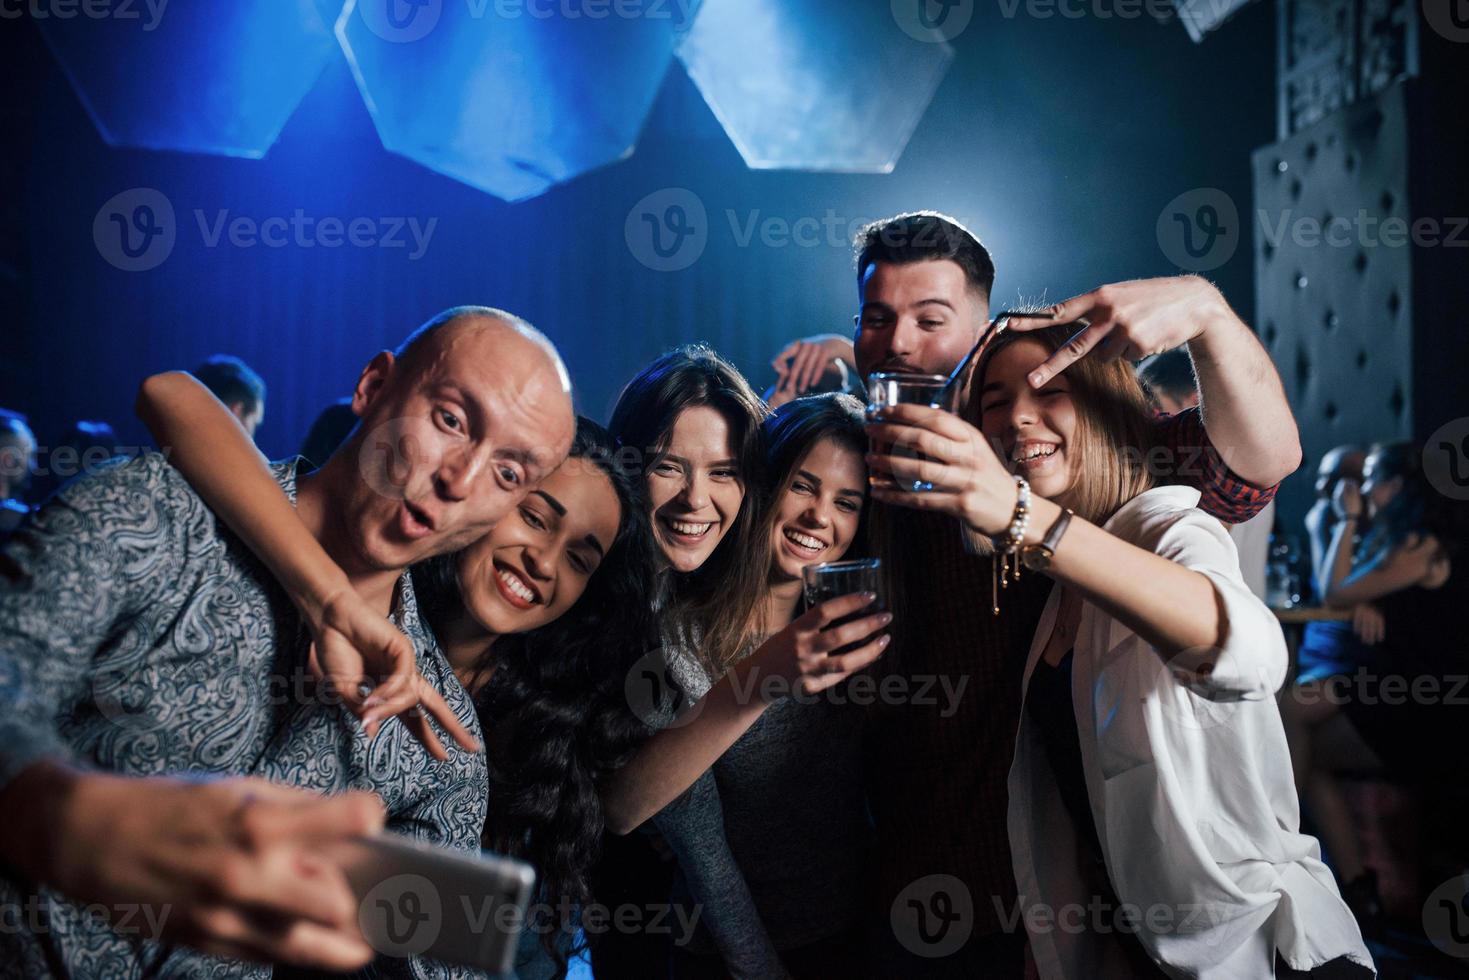 Making funny face. Friends taking selfie in beautiful nightclub. With drinks in the hands photo